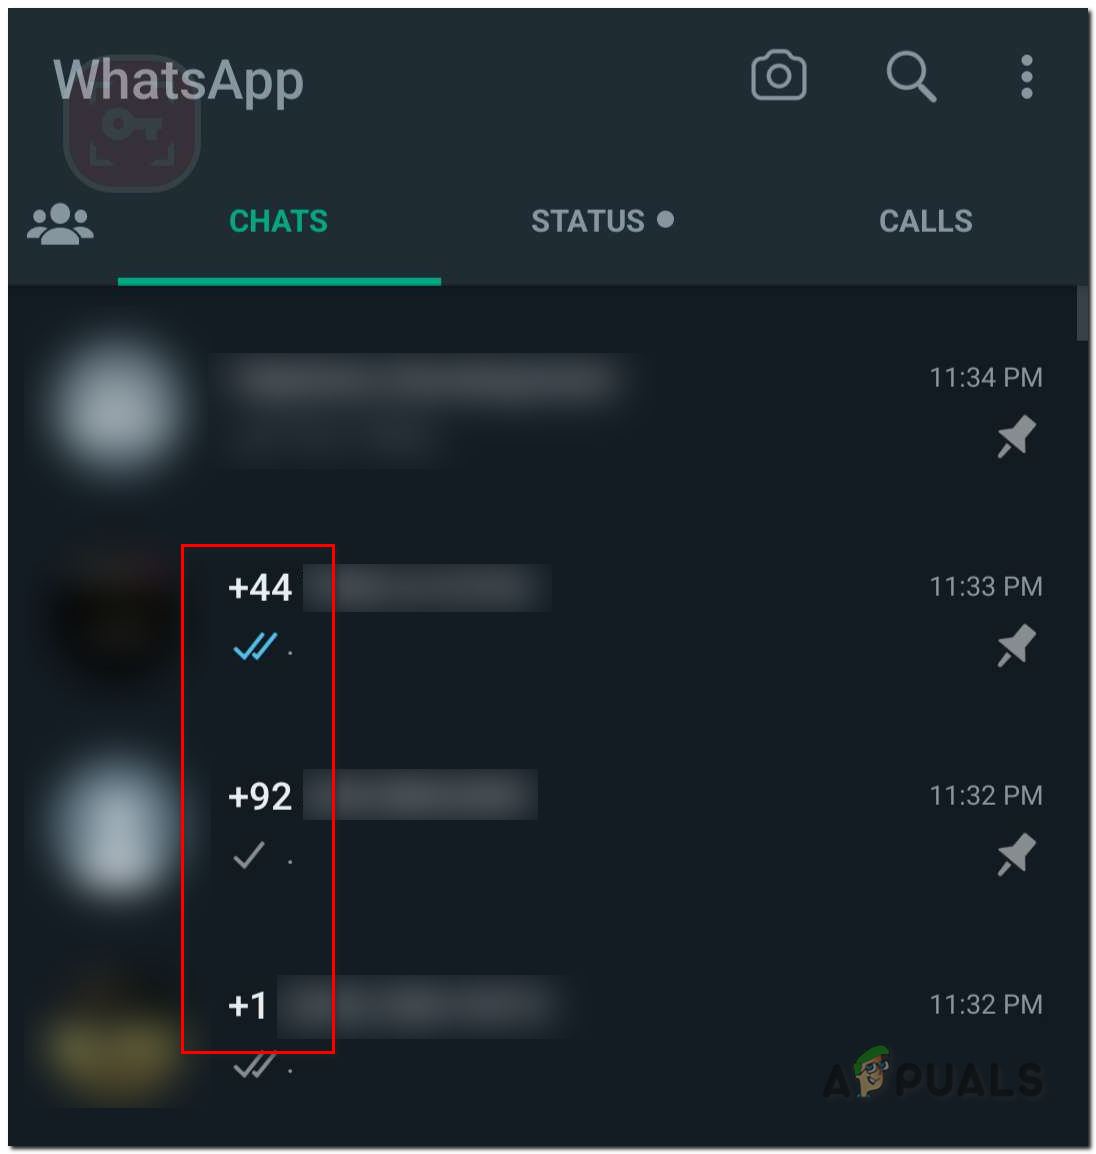 Contacts not showing in WhatsApp